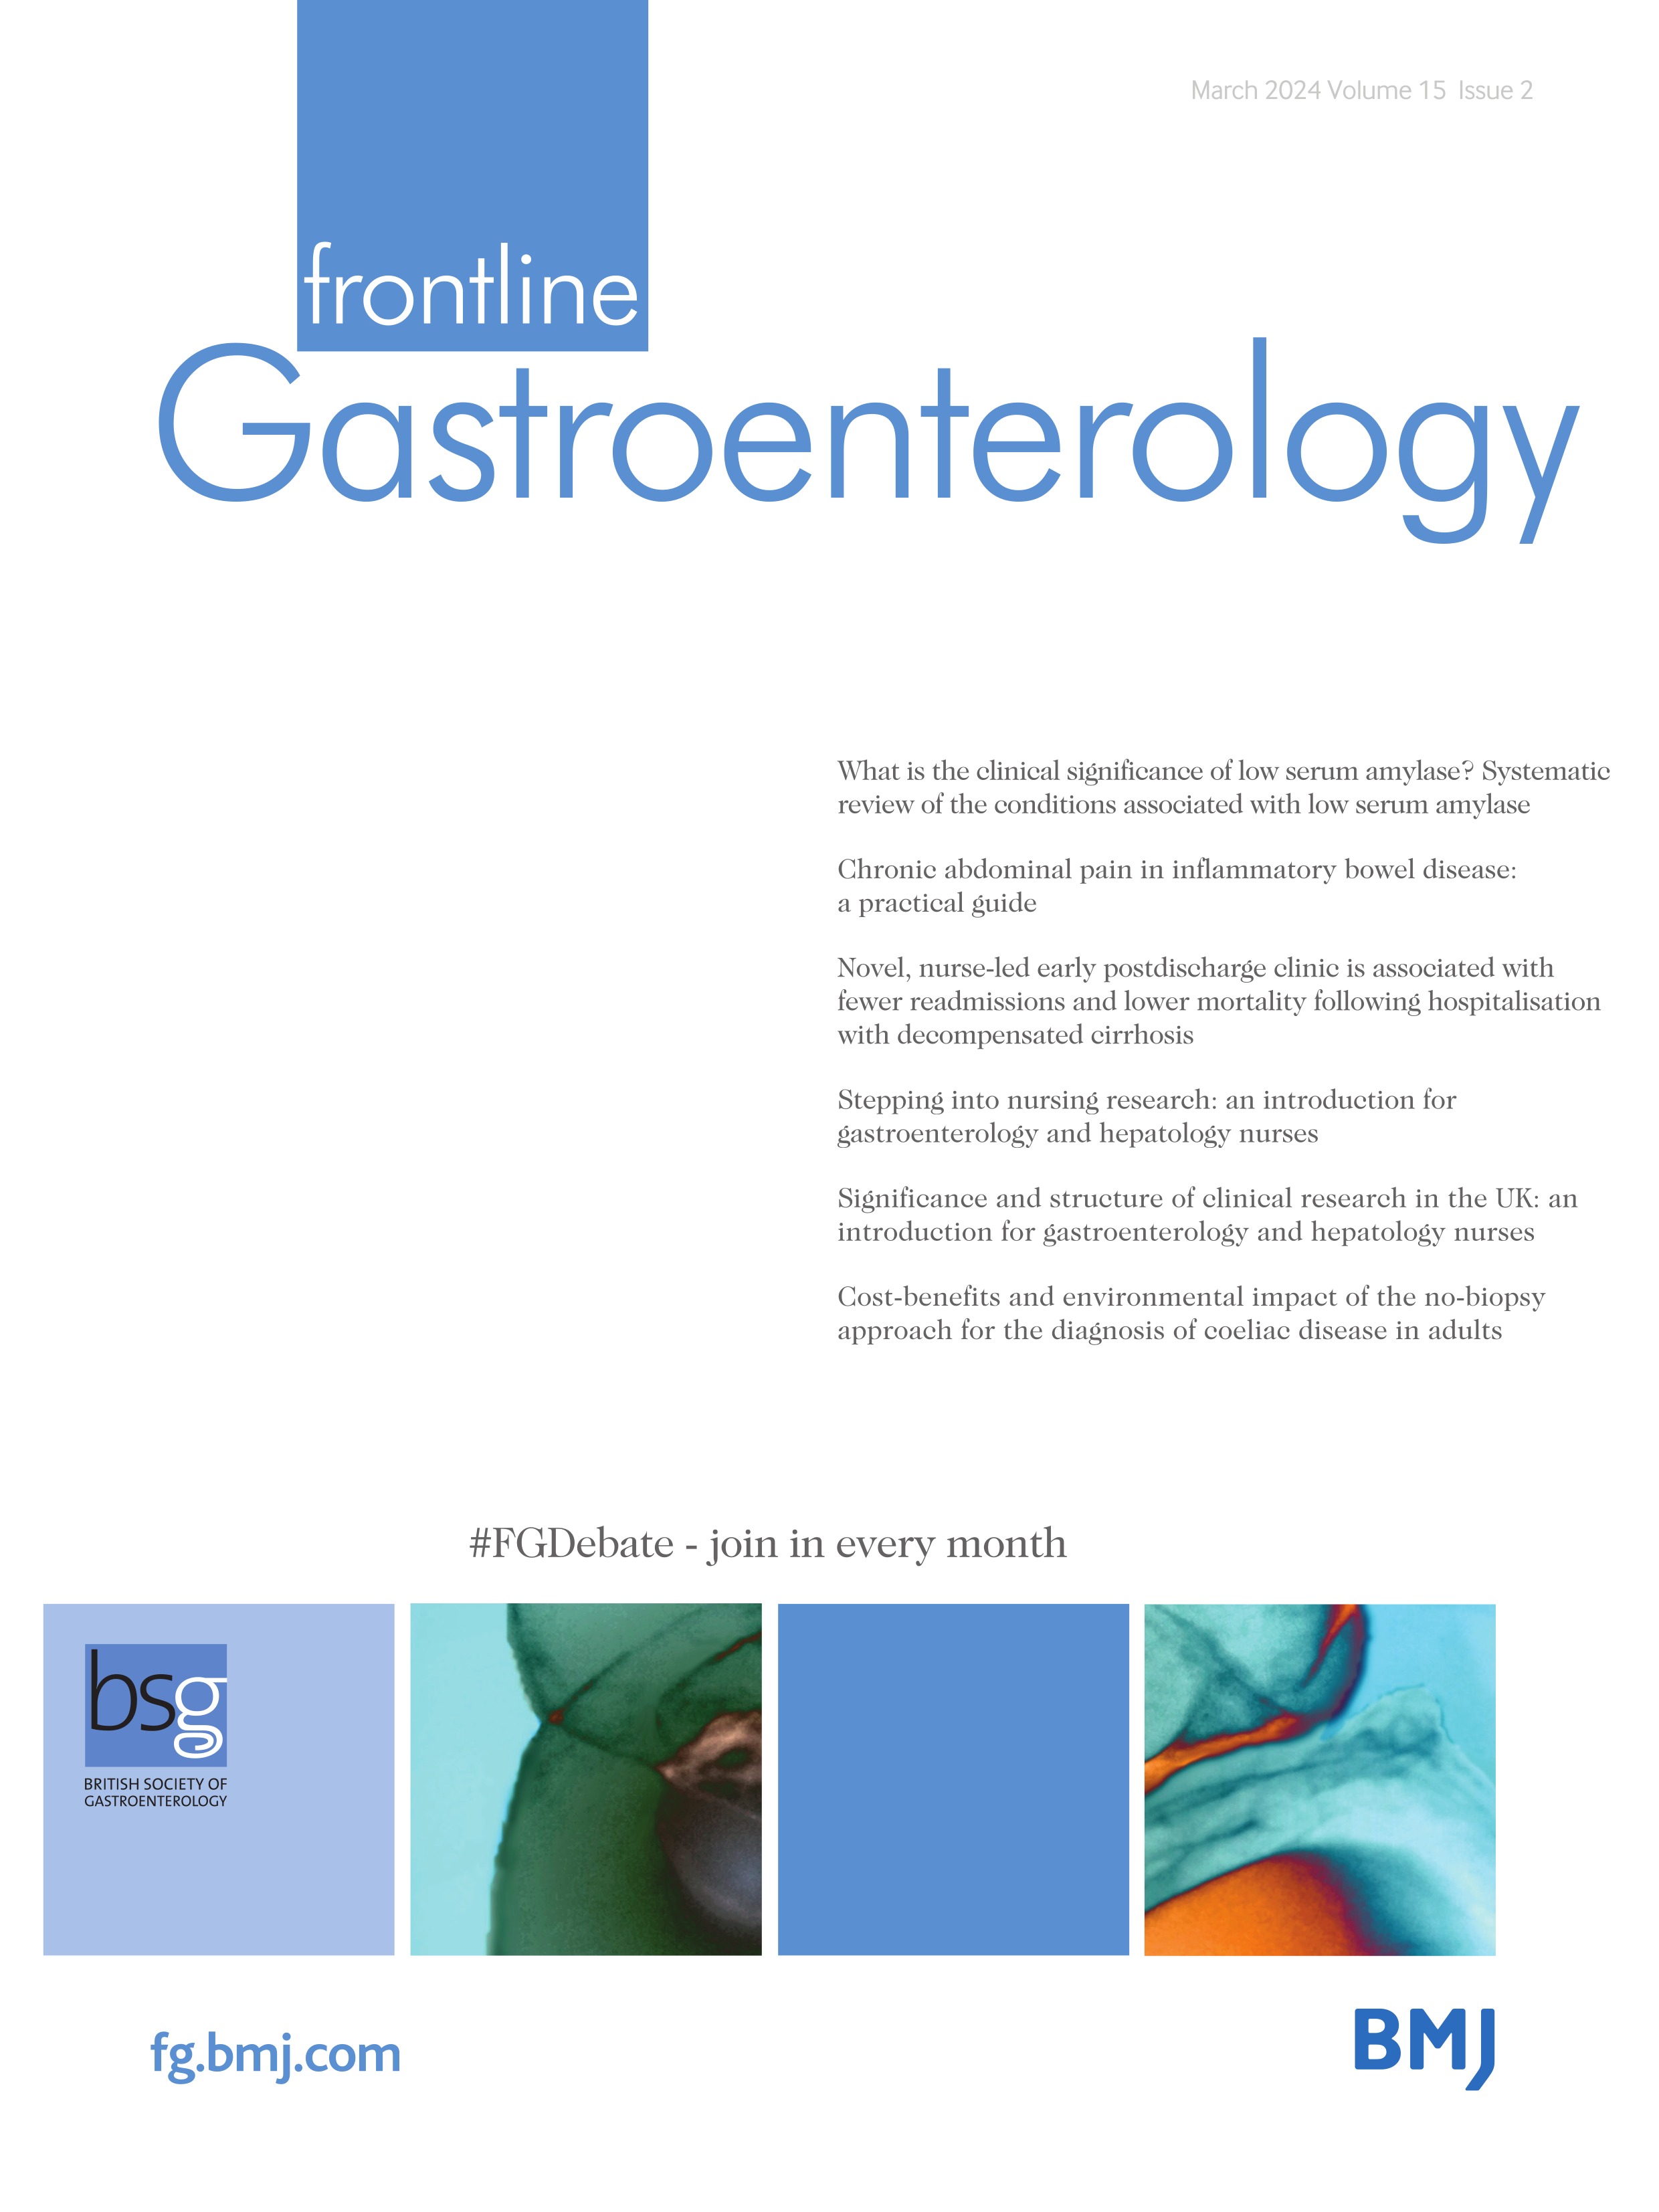 Significance and structure of clinical research in the UK: an introduction for gastroenterology and hepatology nurses